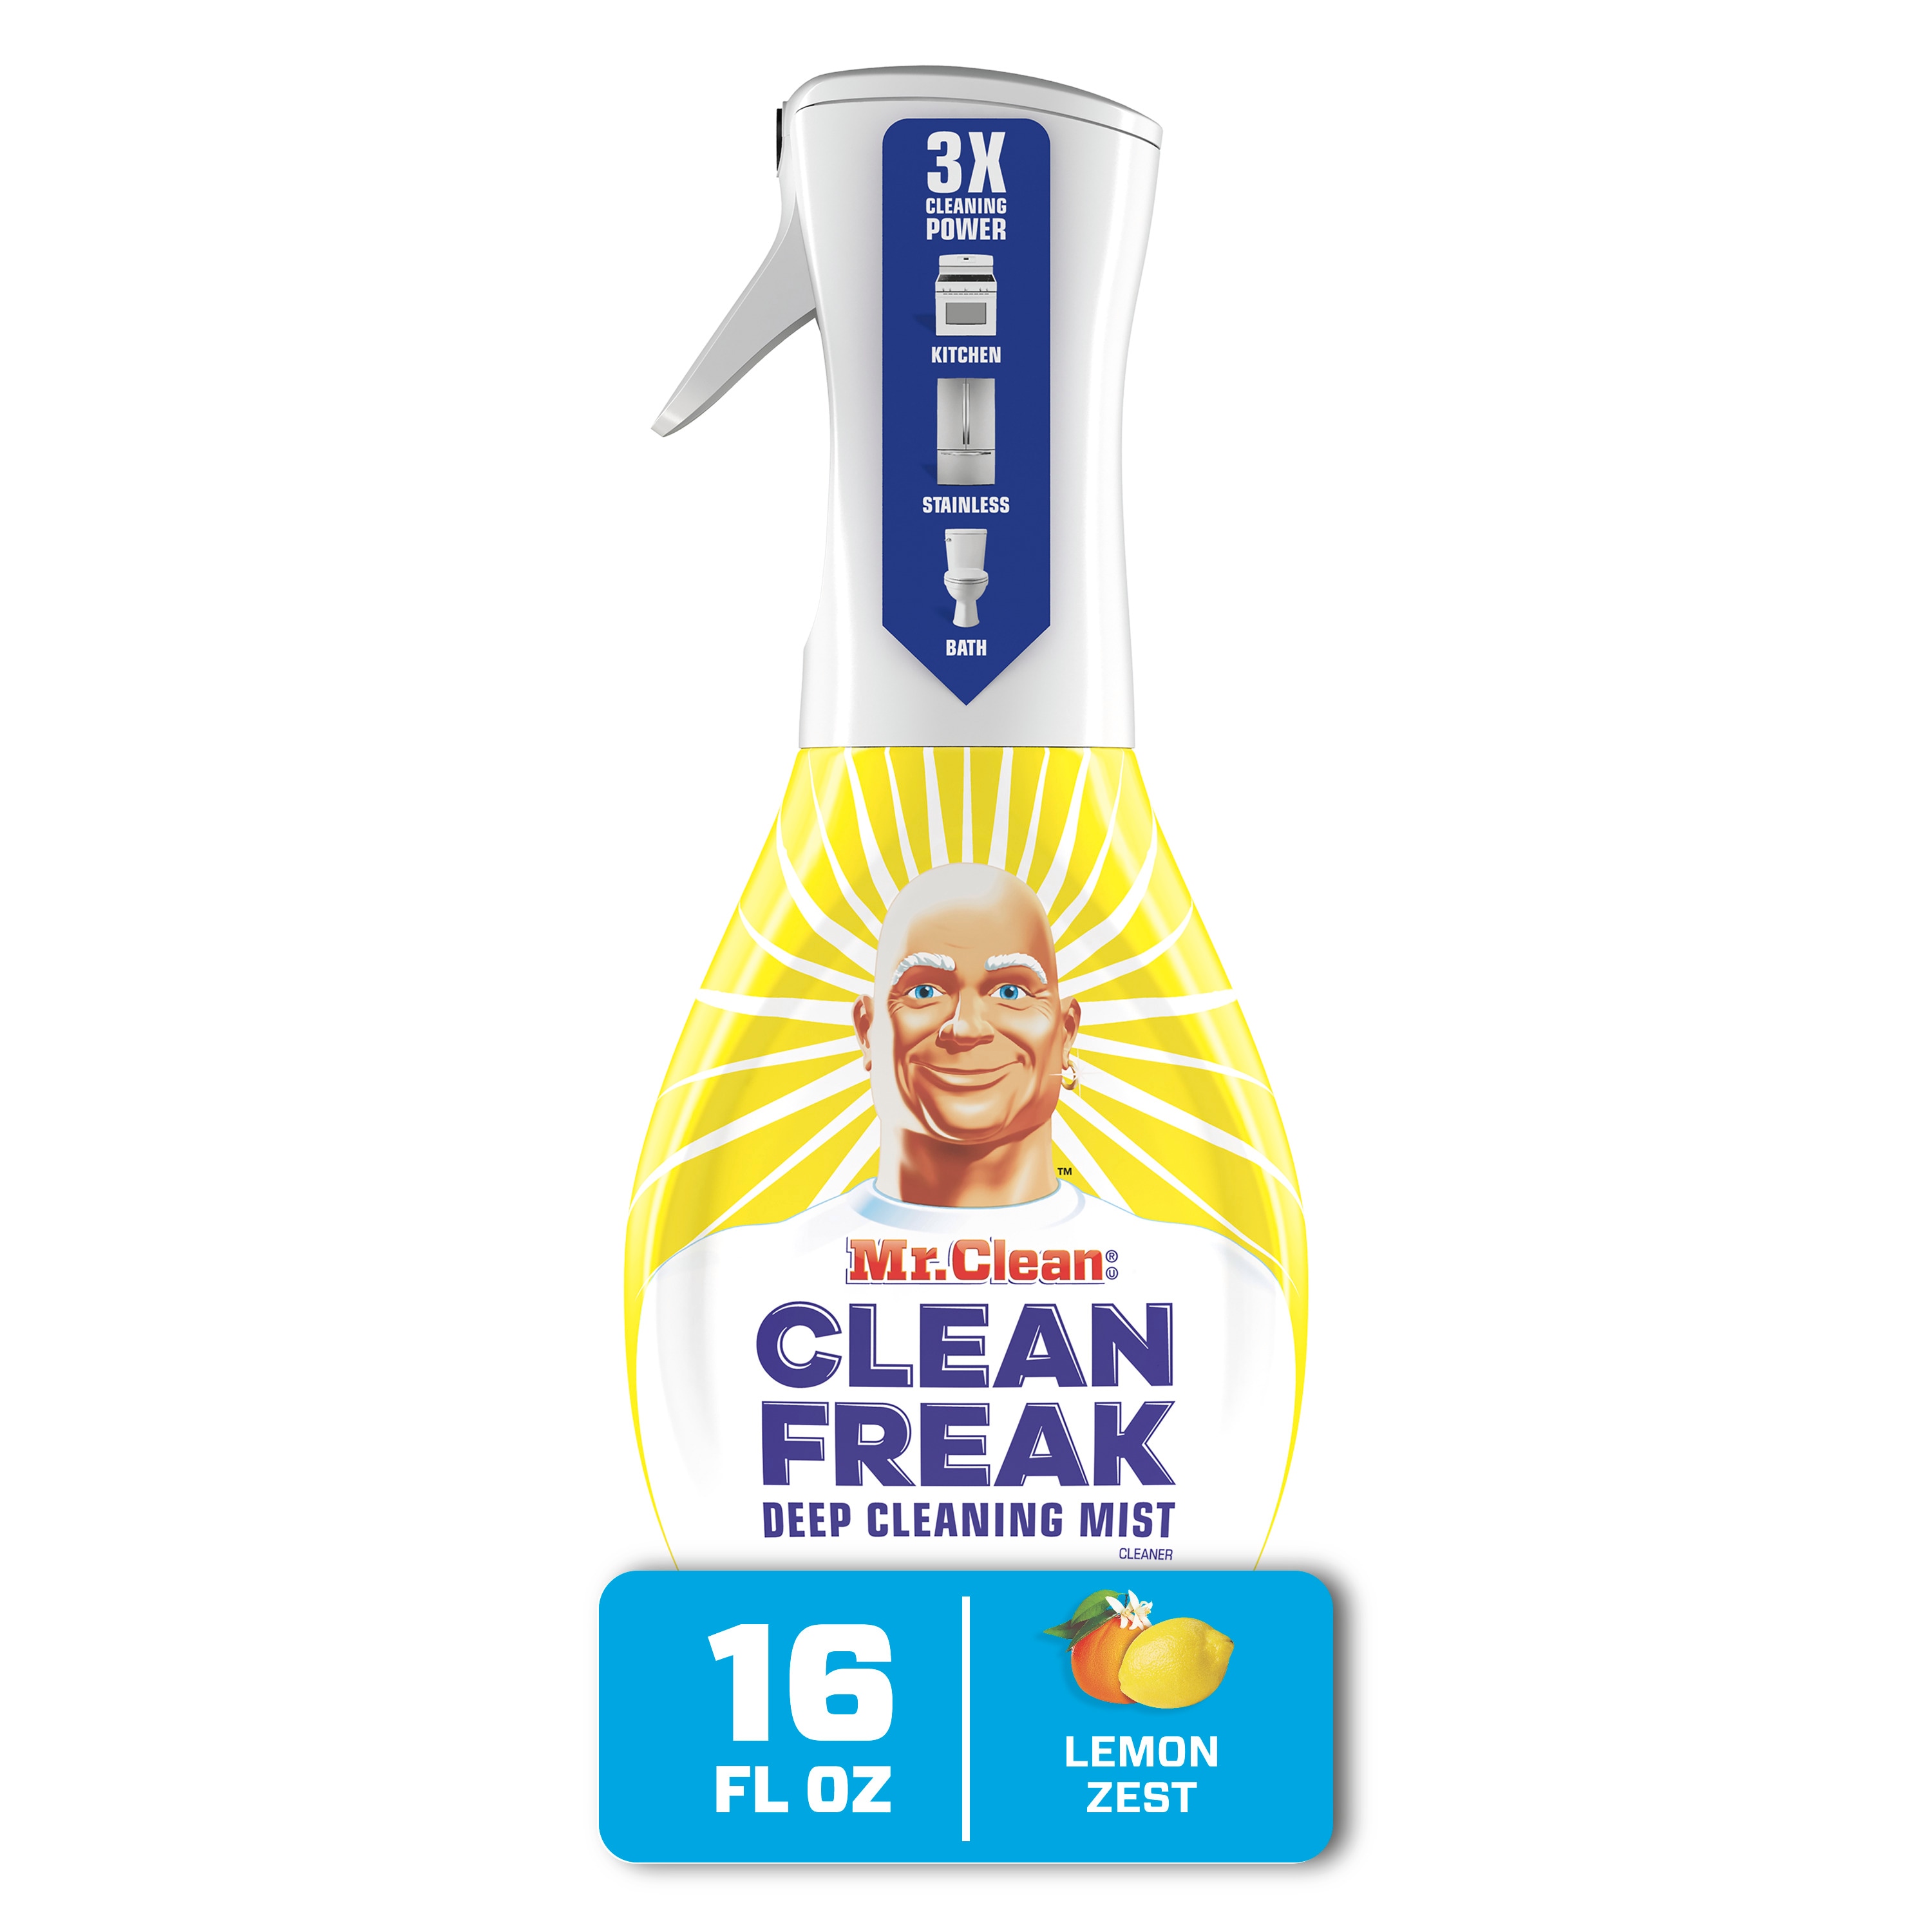 Mr. Clean Magic Eraser Select-a-Size - Shop All Purpose Cleaners